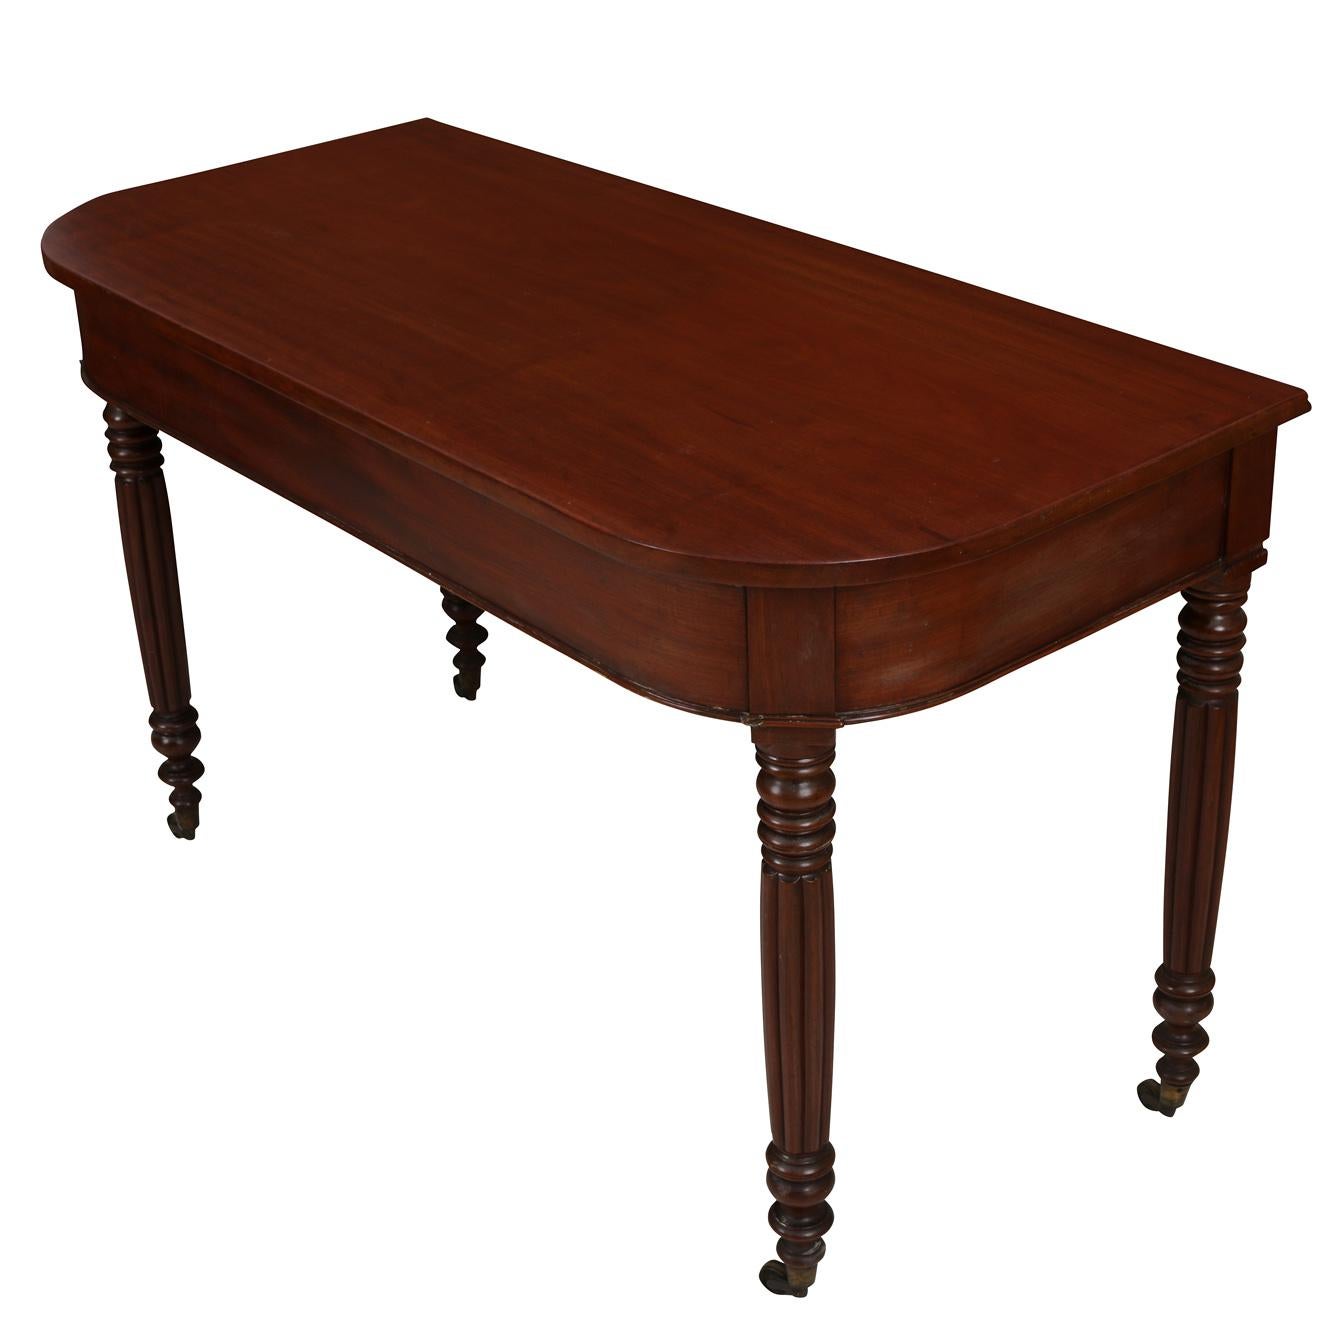 Mid-Century Modern Pair of Vintage Mahogany Demilune Tables with Fluted Legs and Wheels For Sale